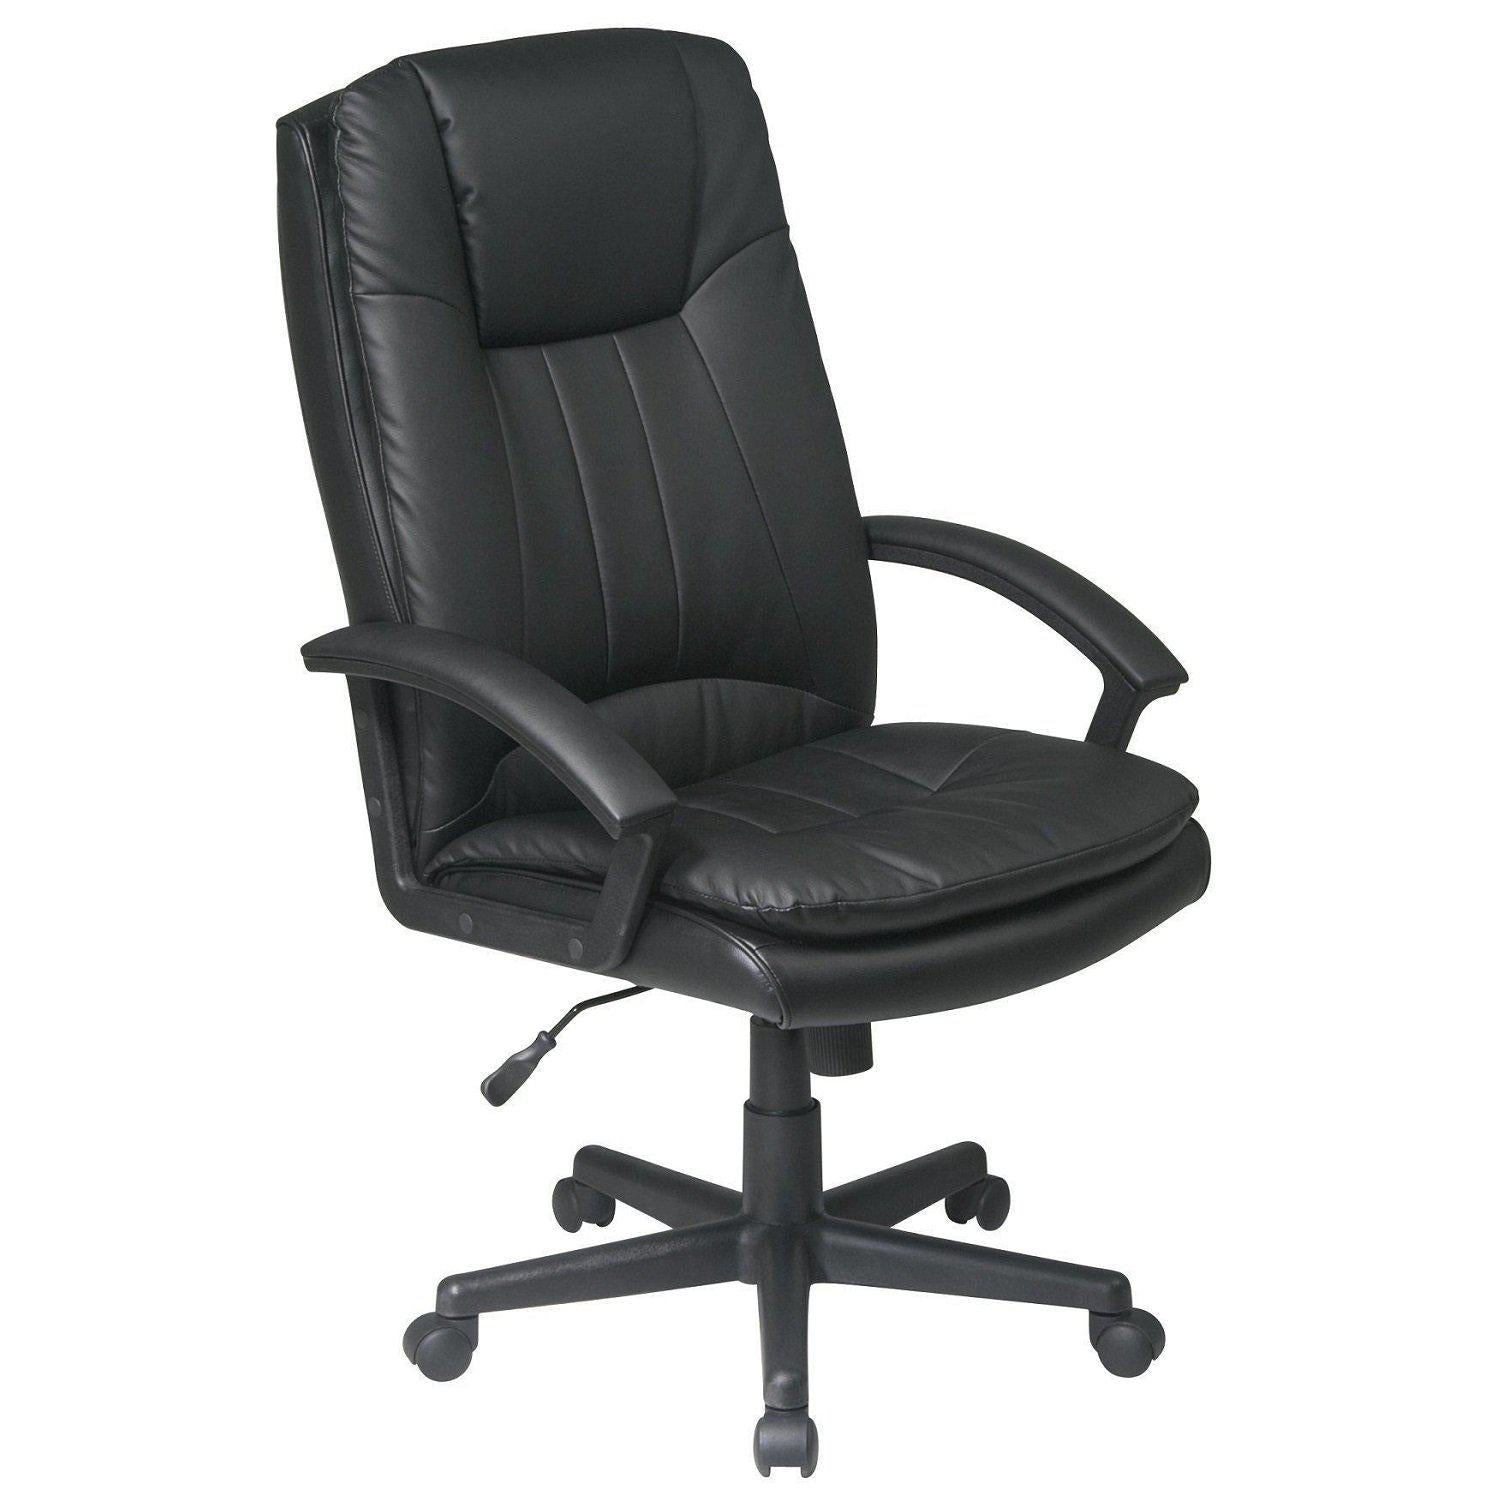 Deluxe High Back Bonded Leather Executive Chair